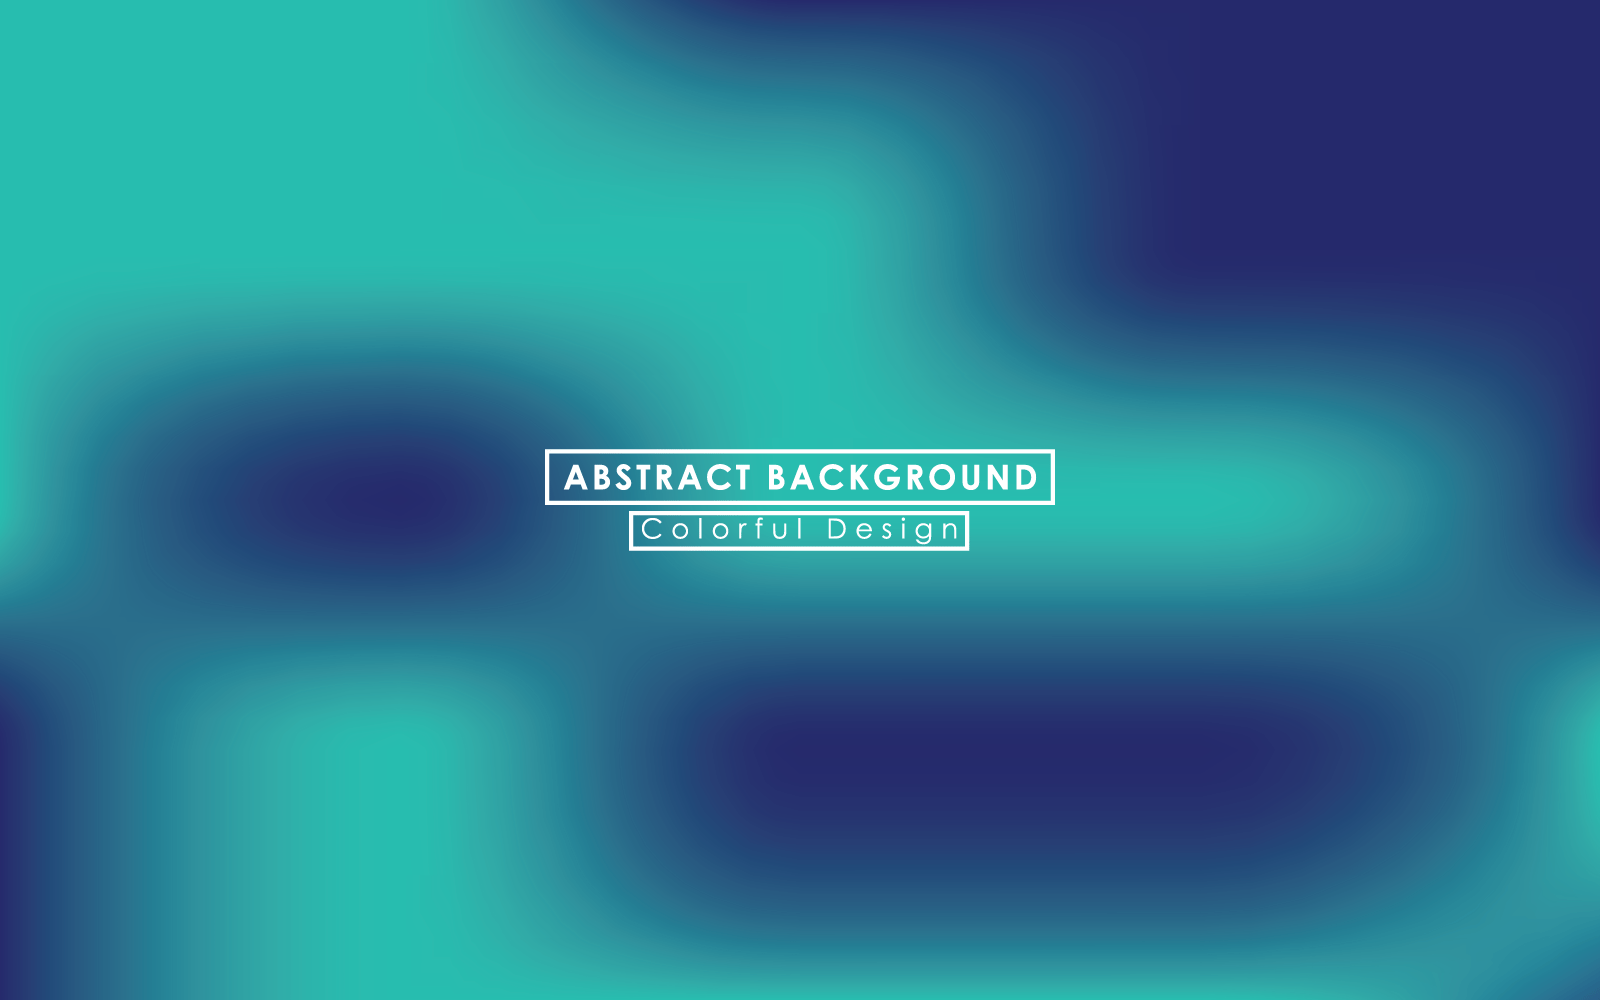 Design Abstract blurred gradient mesh illustration background Logo Template